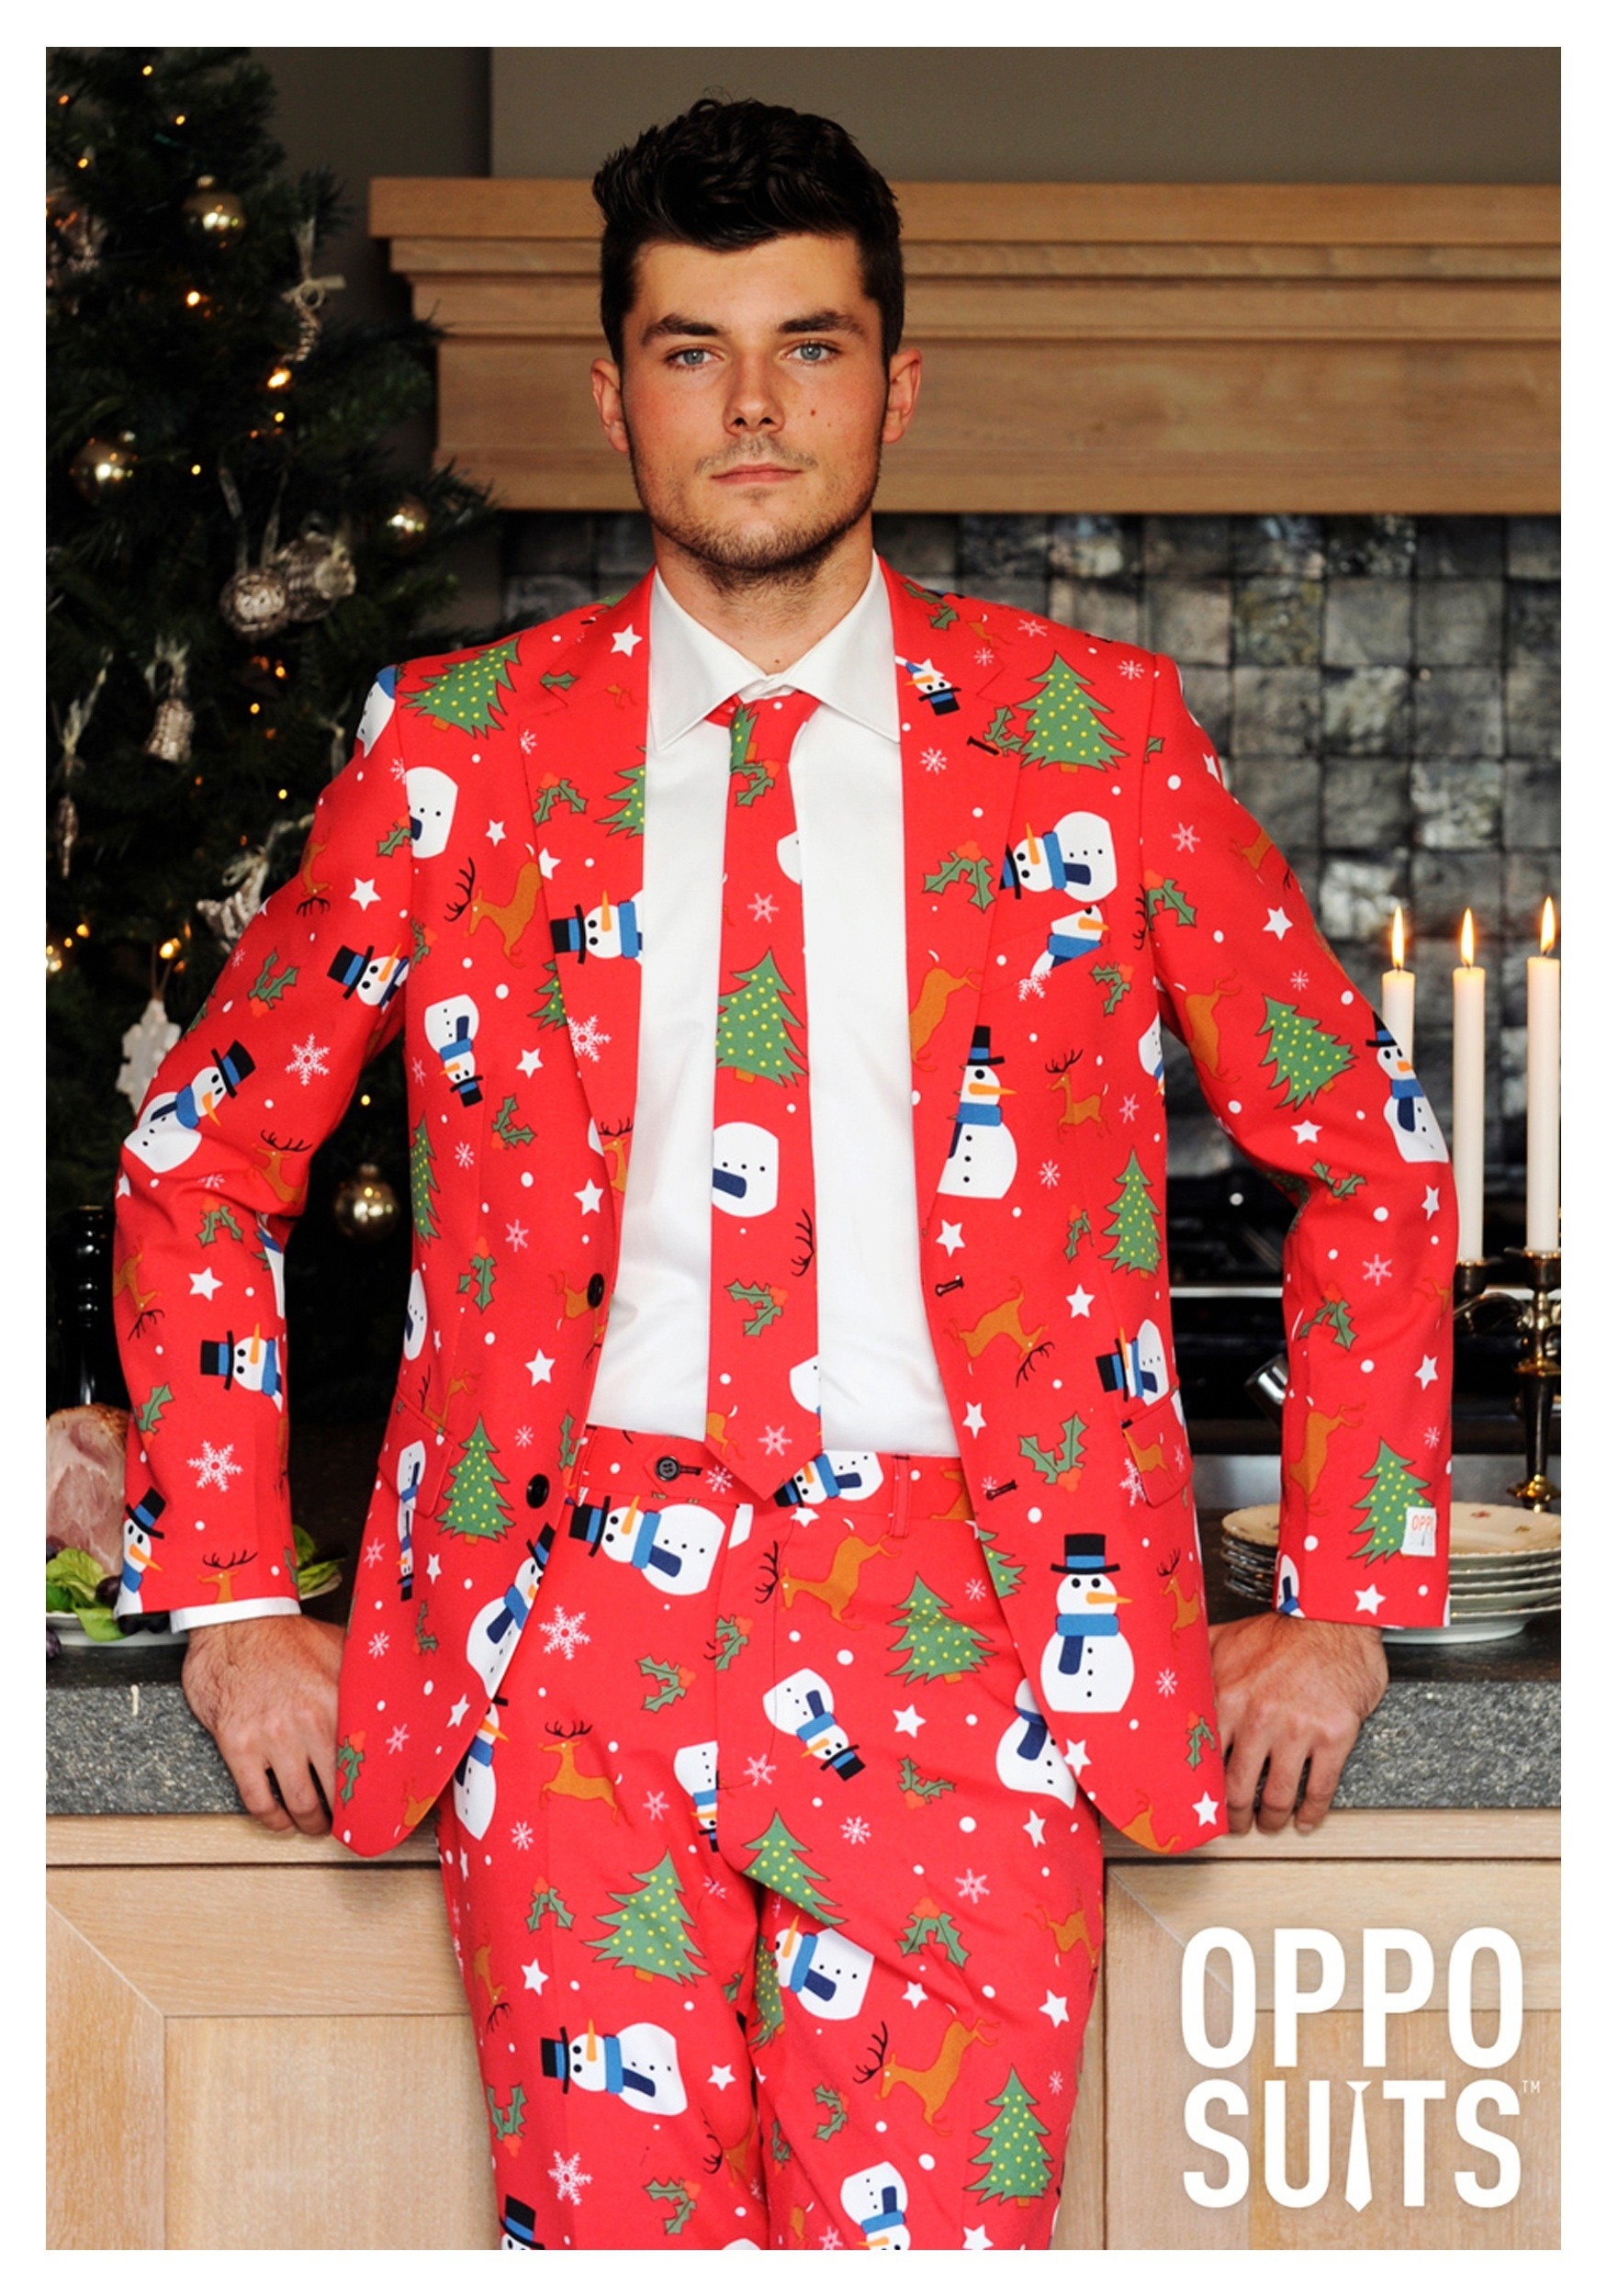 Image of Men's OppoSuits Red Christmas Costume Suit ID OSOSUI0020-42